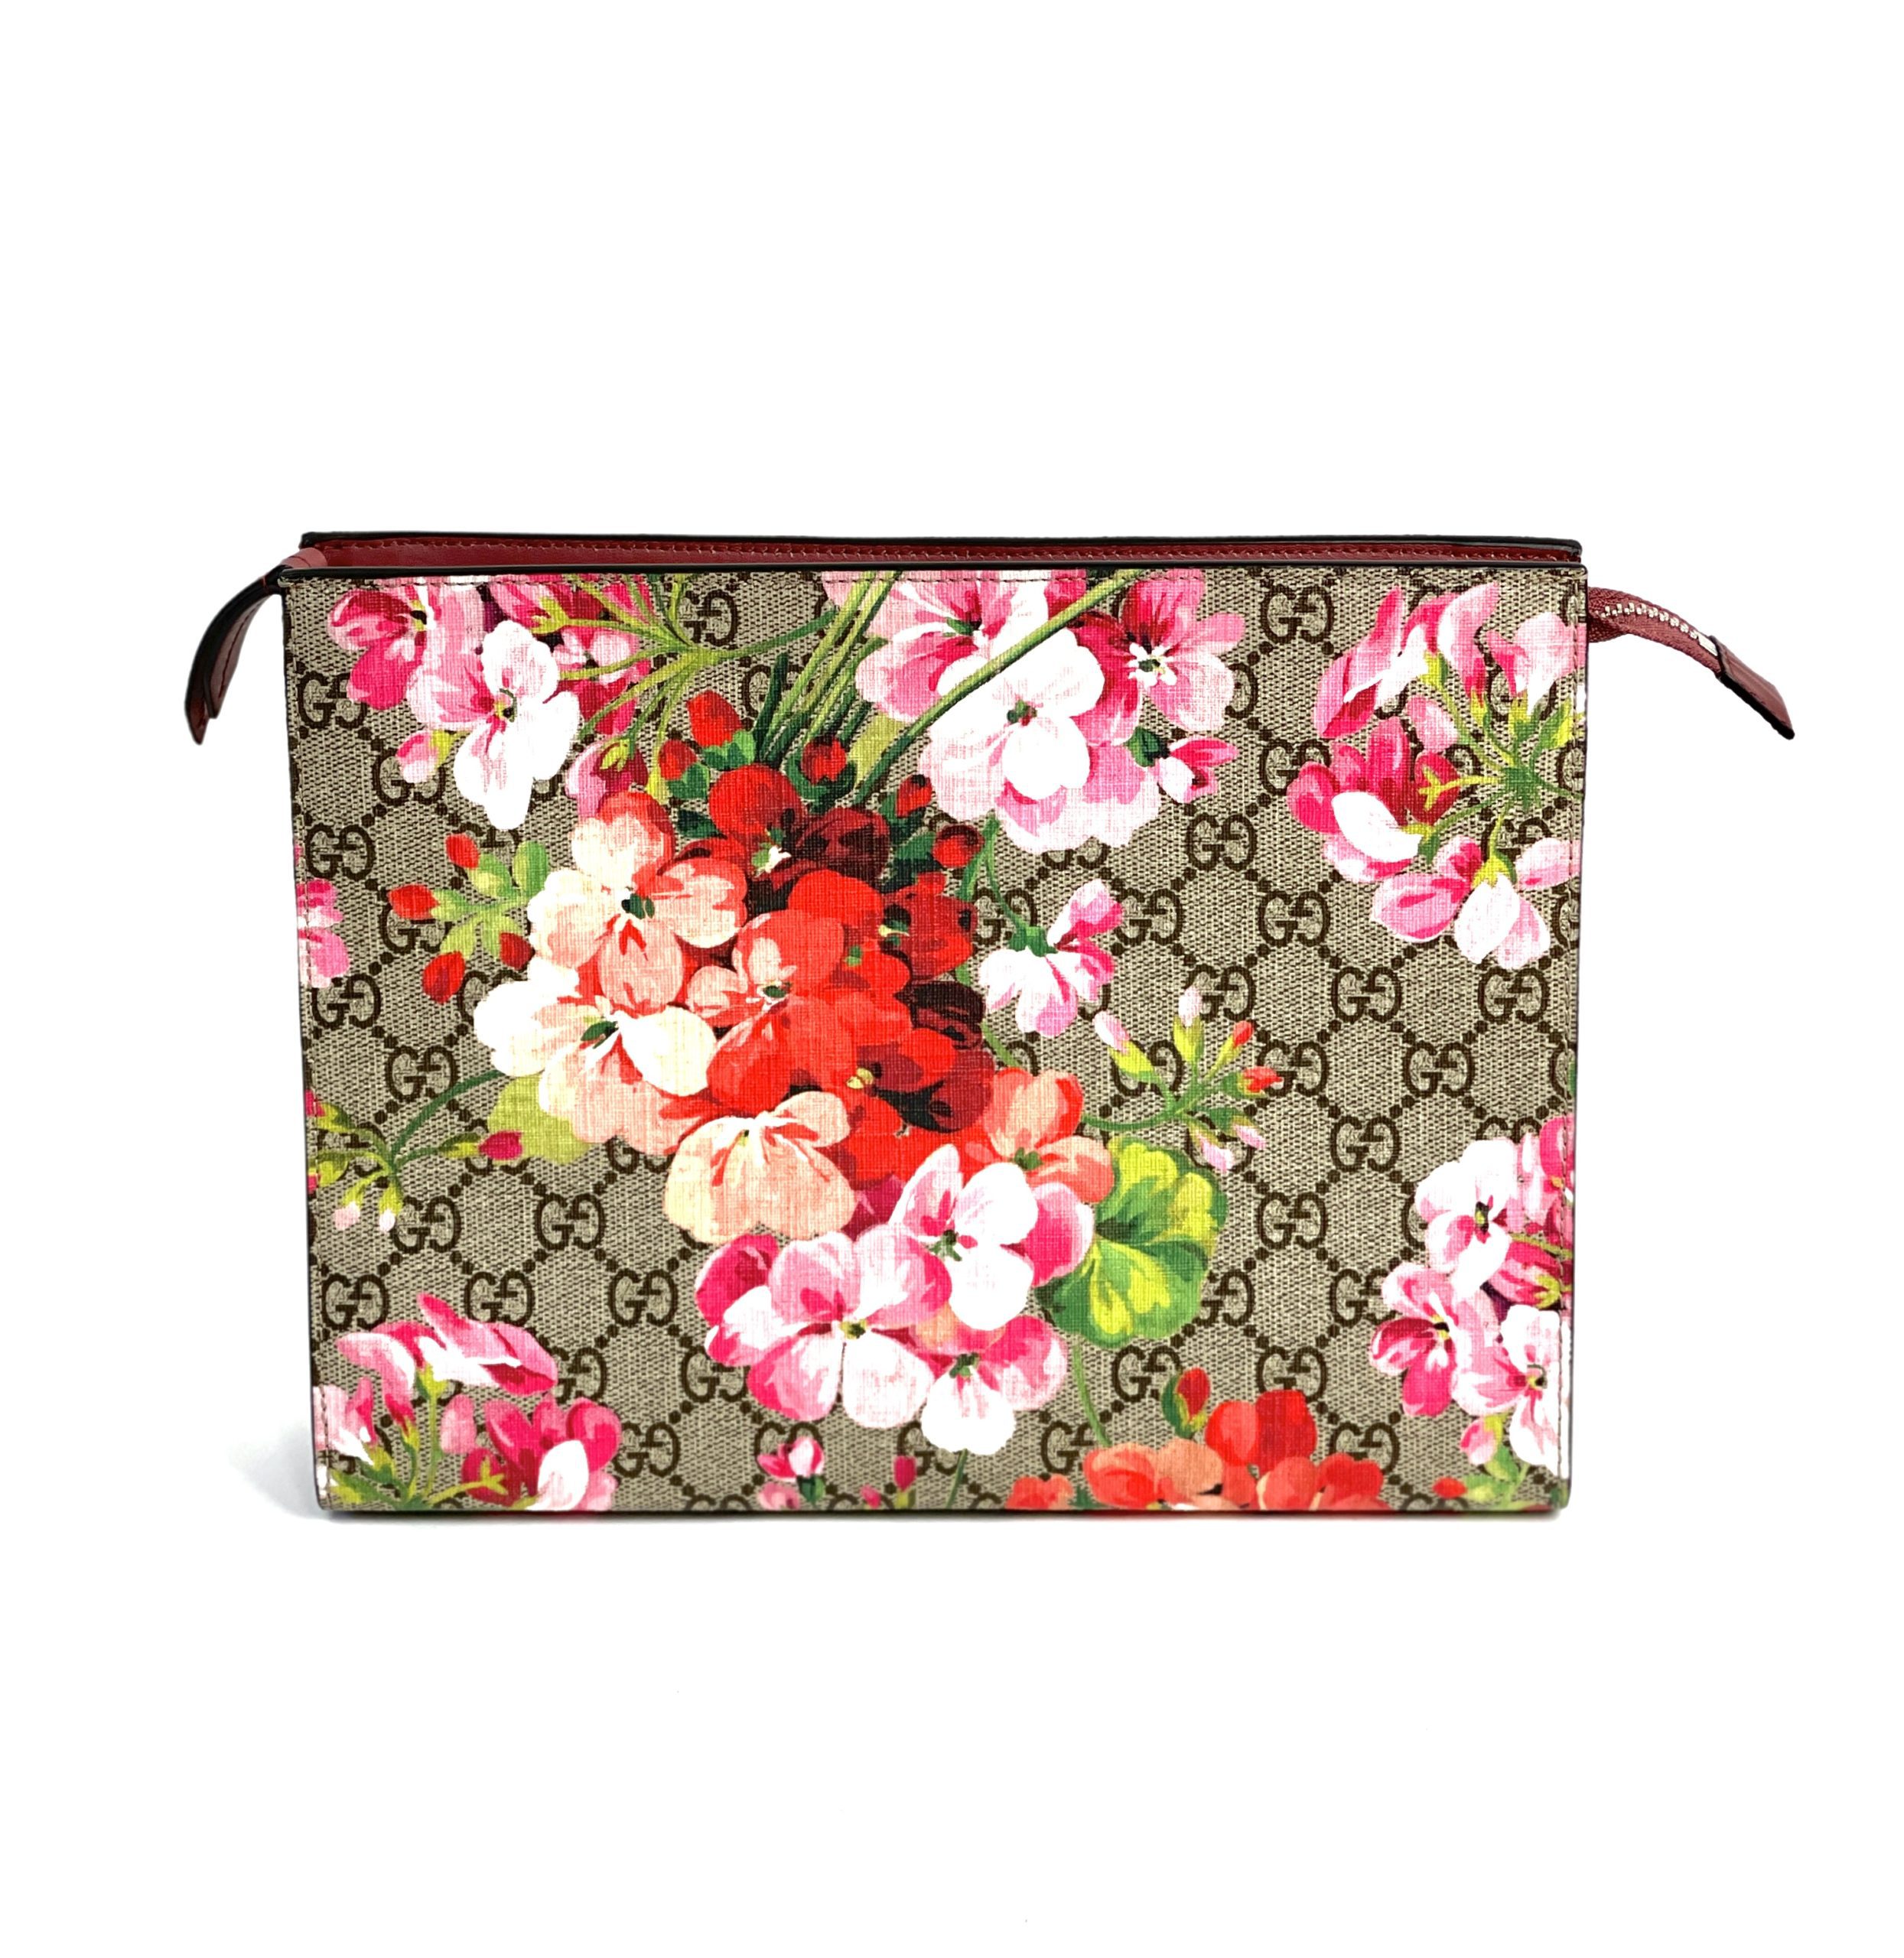 Gucci GG Blooms Large Cosmetic Case - Handbags - GUC265022